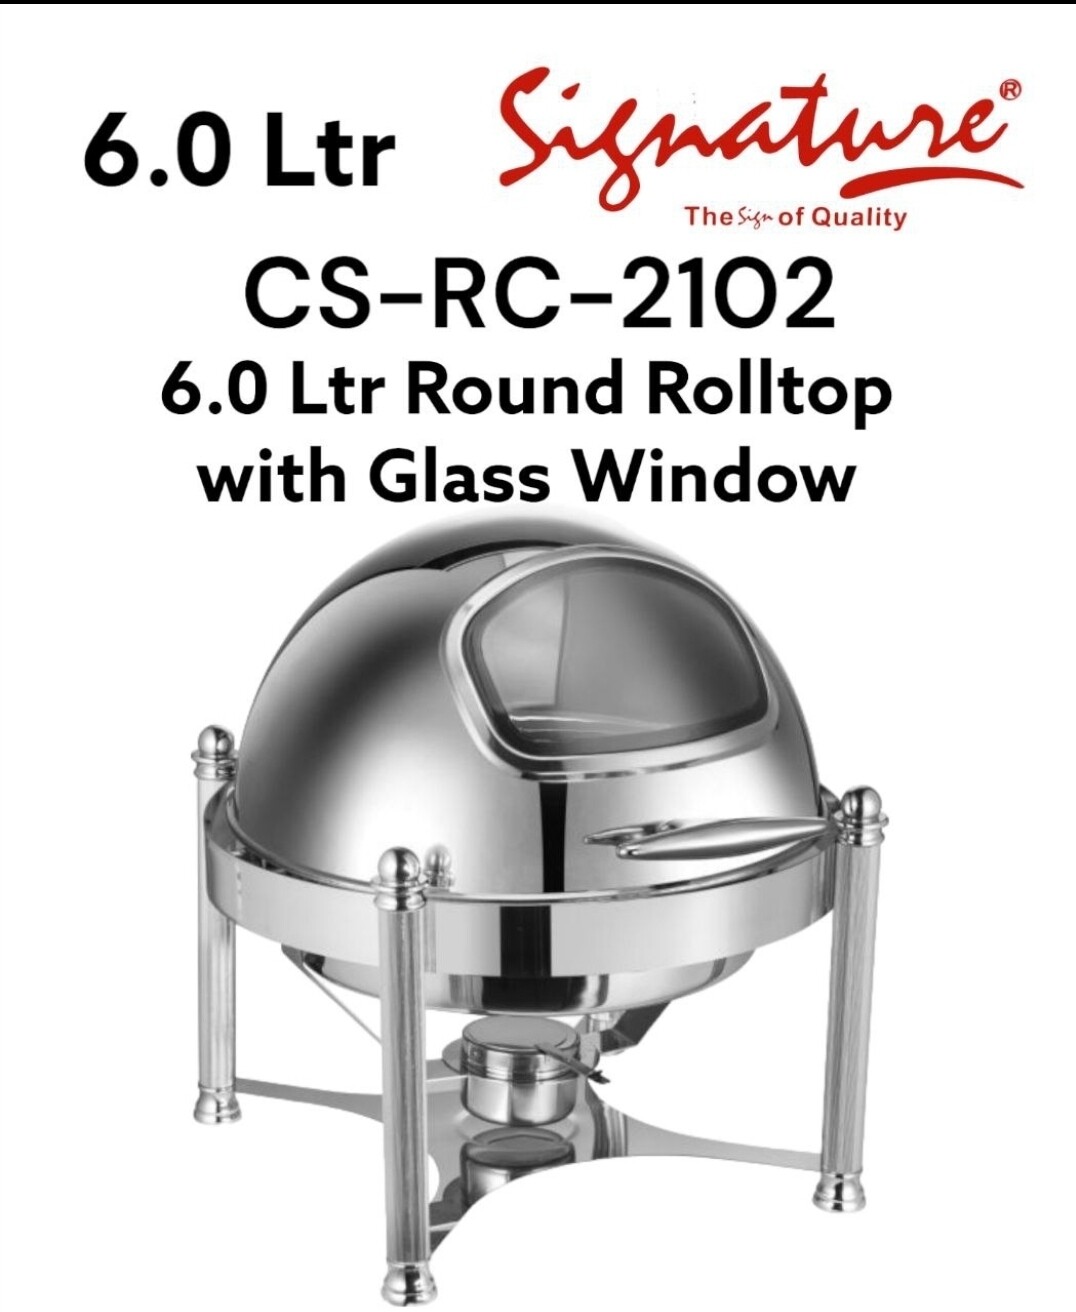 Signature 6.0 Ltr Round Rolltop with Glass Window
Single Compartment
CS-RC-2102